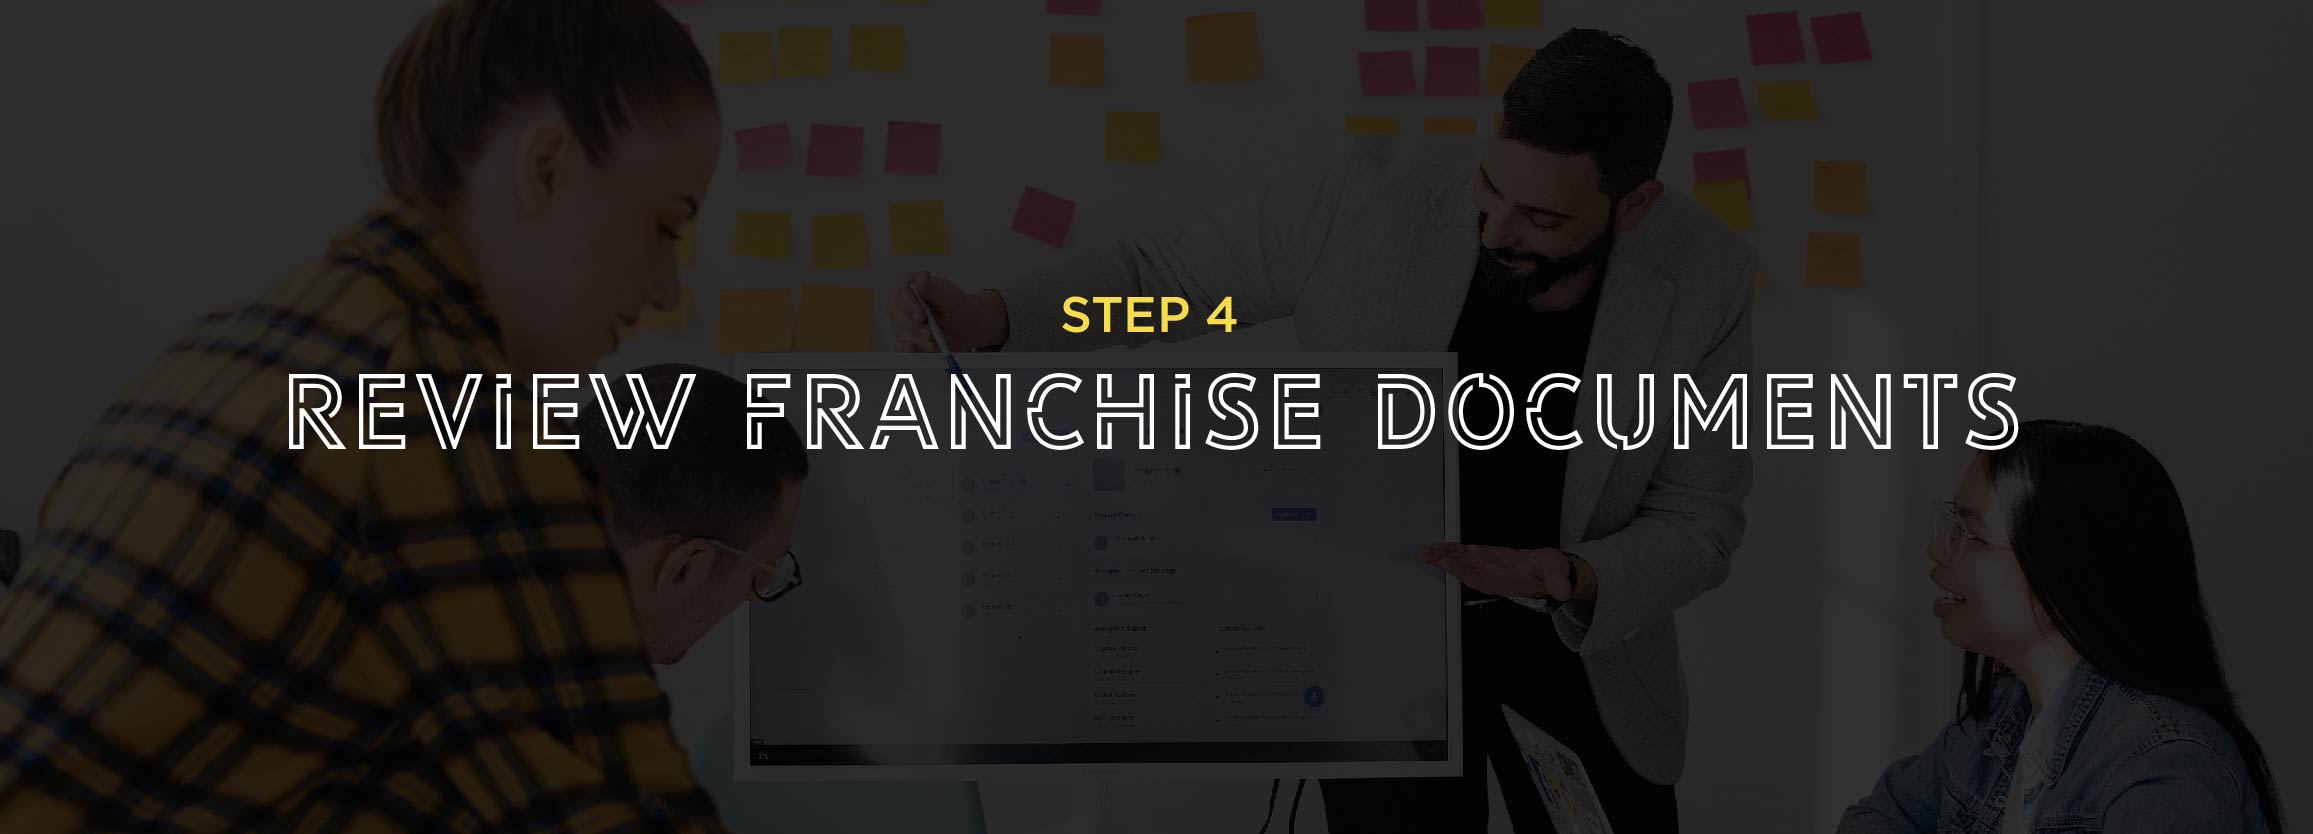 Step 4 - Review franchise documents